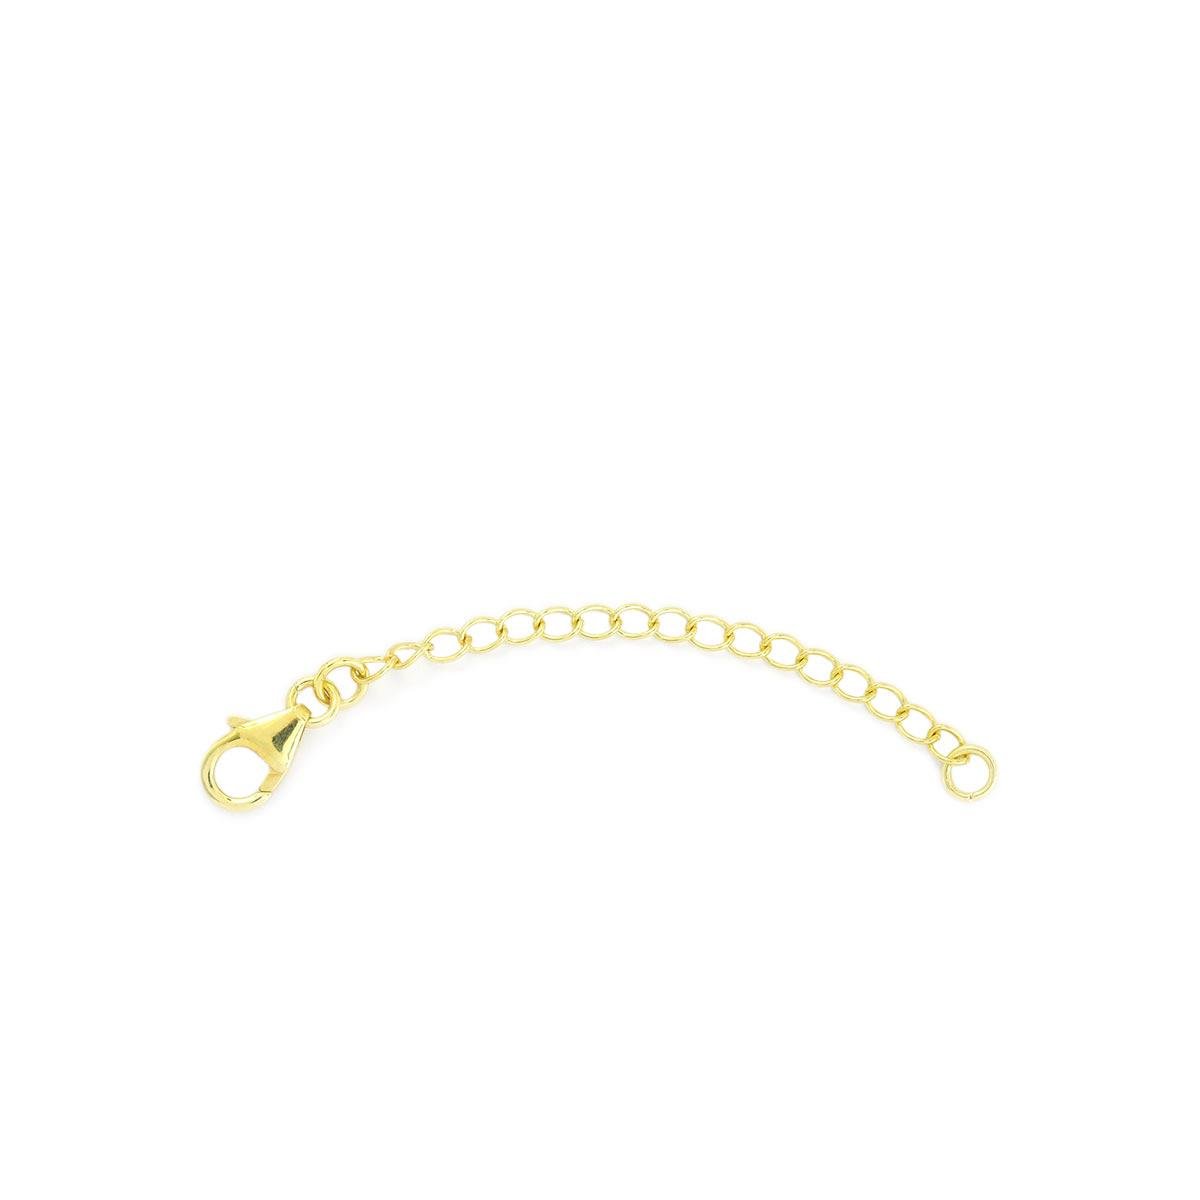 2.50 Gold Plated Sterling Silver Extender